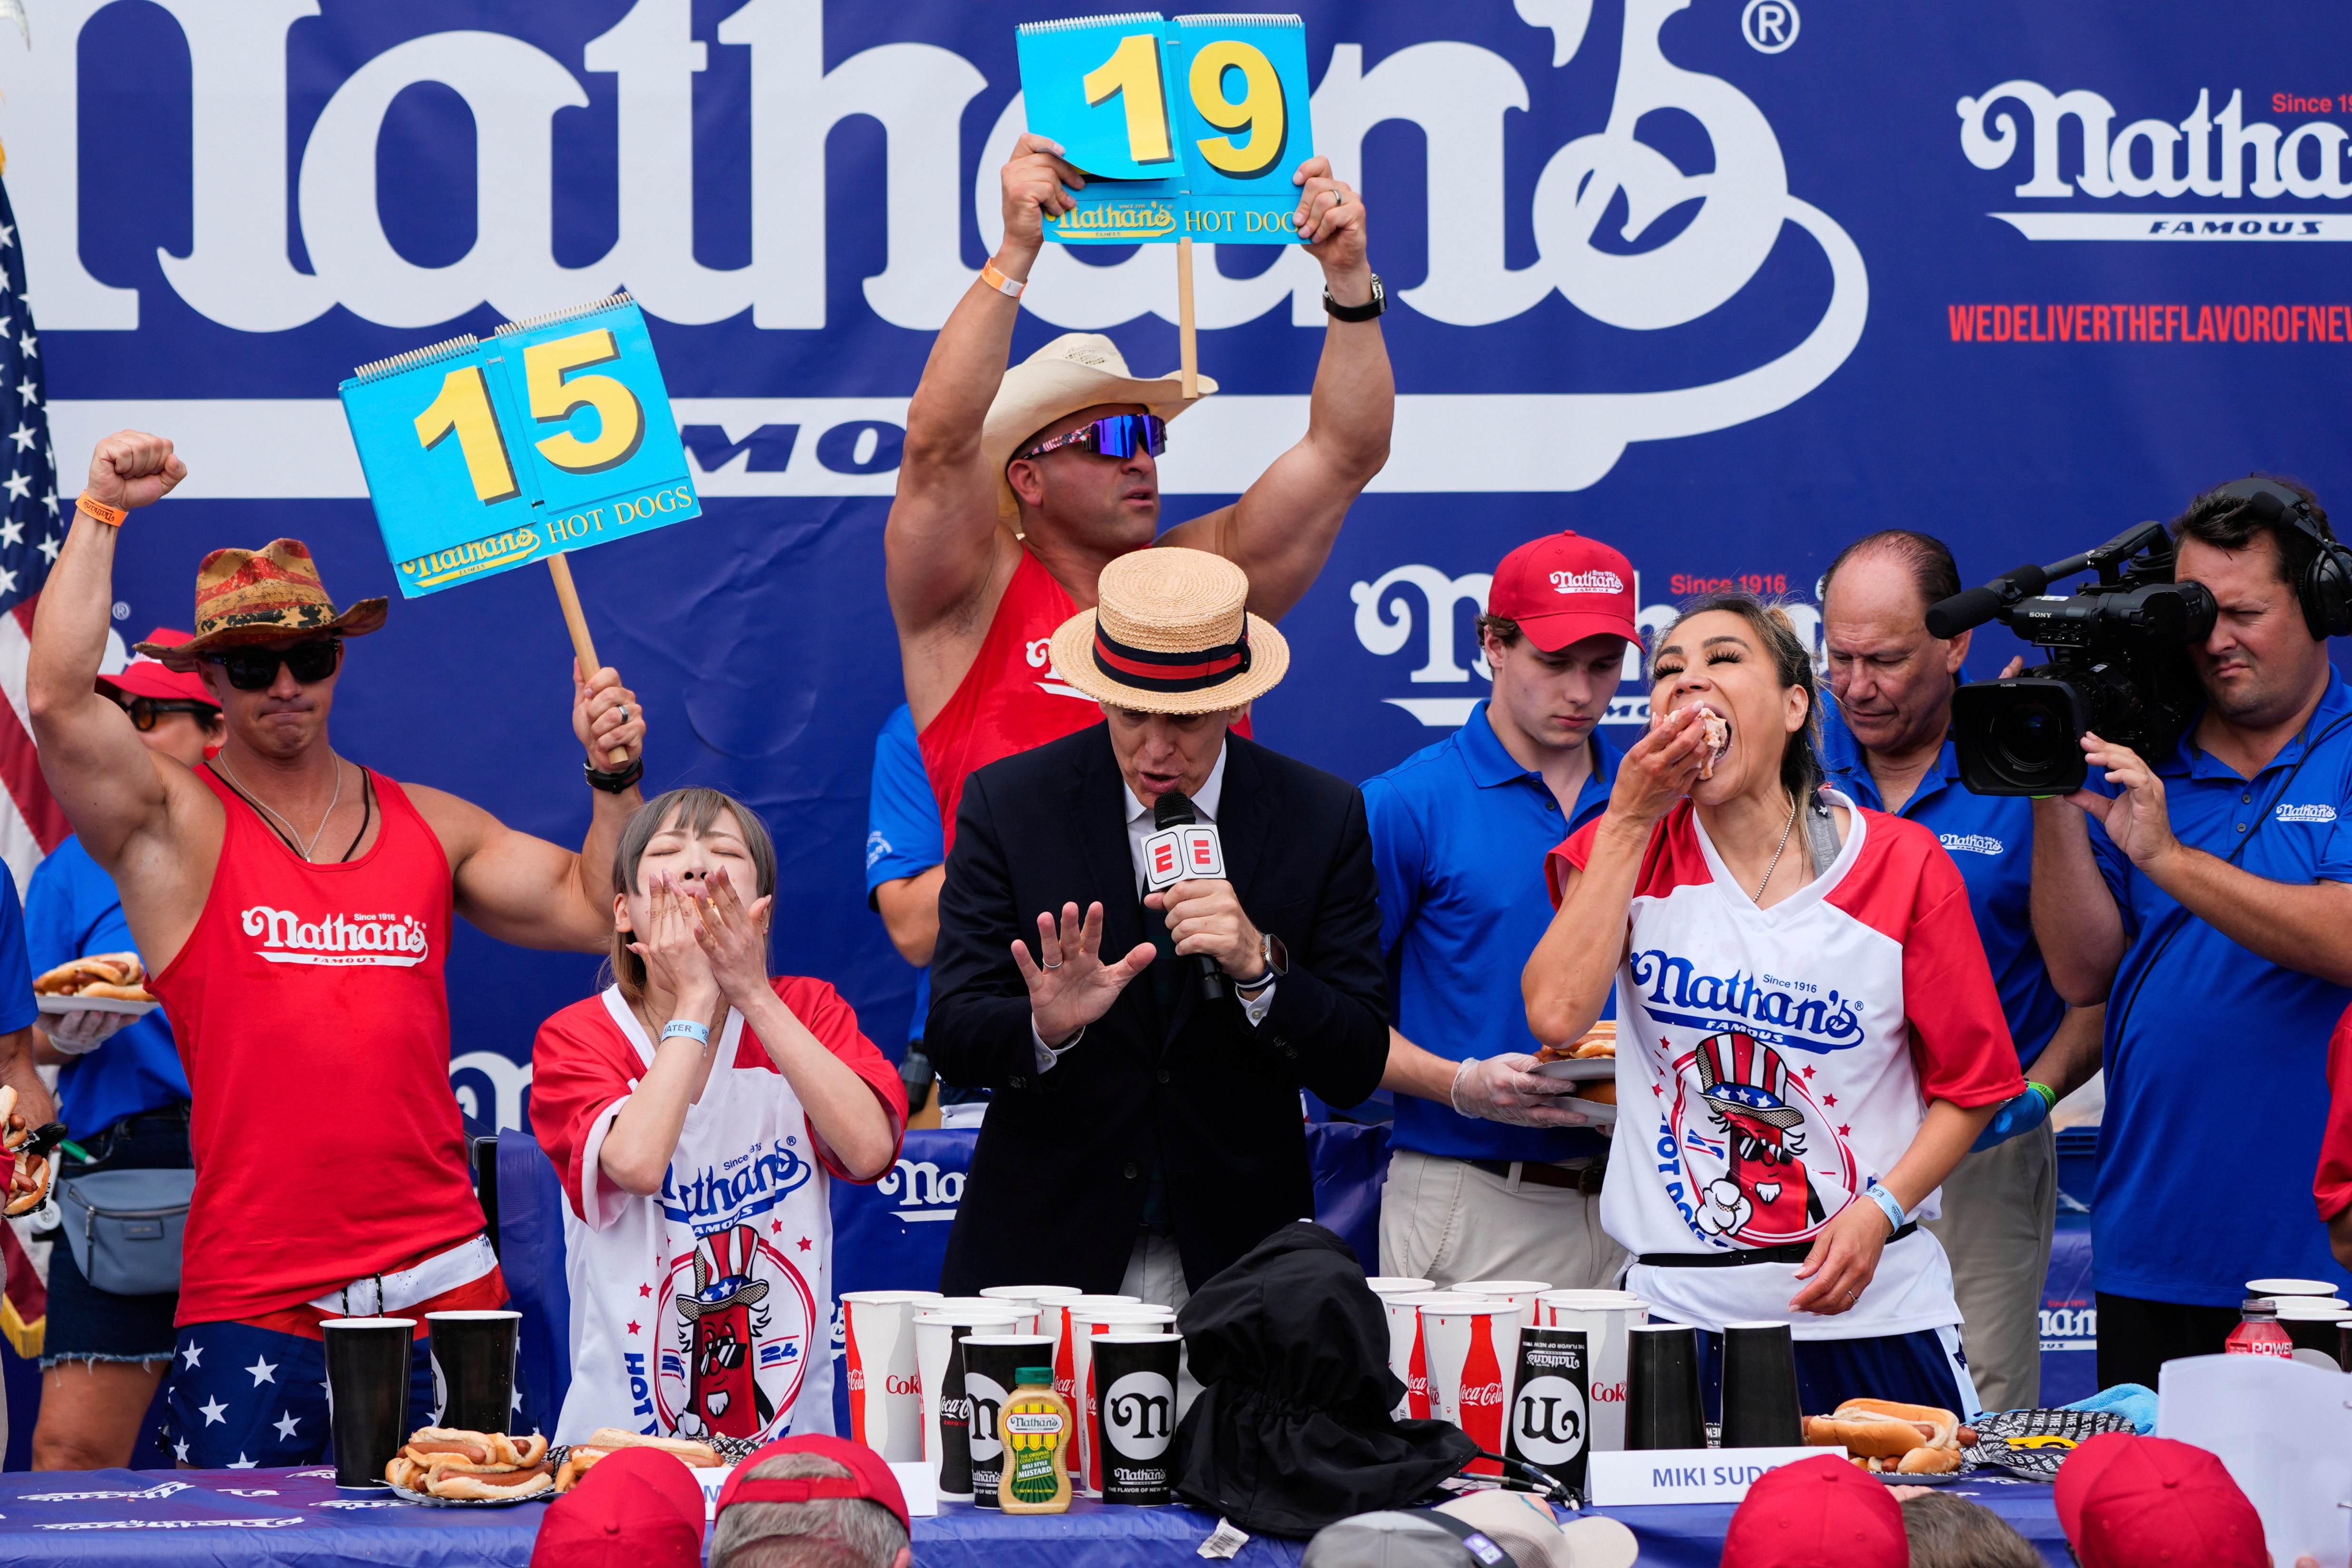 This was the first time in 16 years that someone other than Joey Chestnut won the contest.